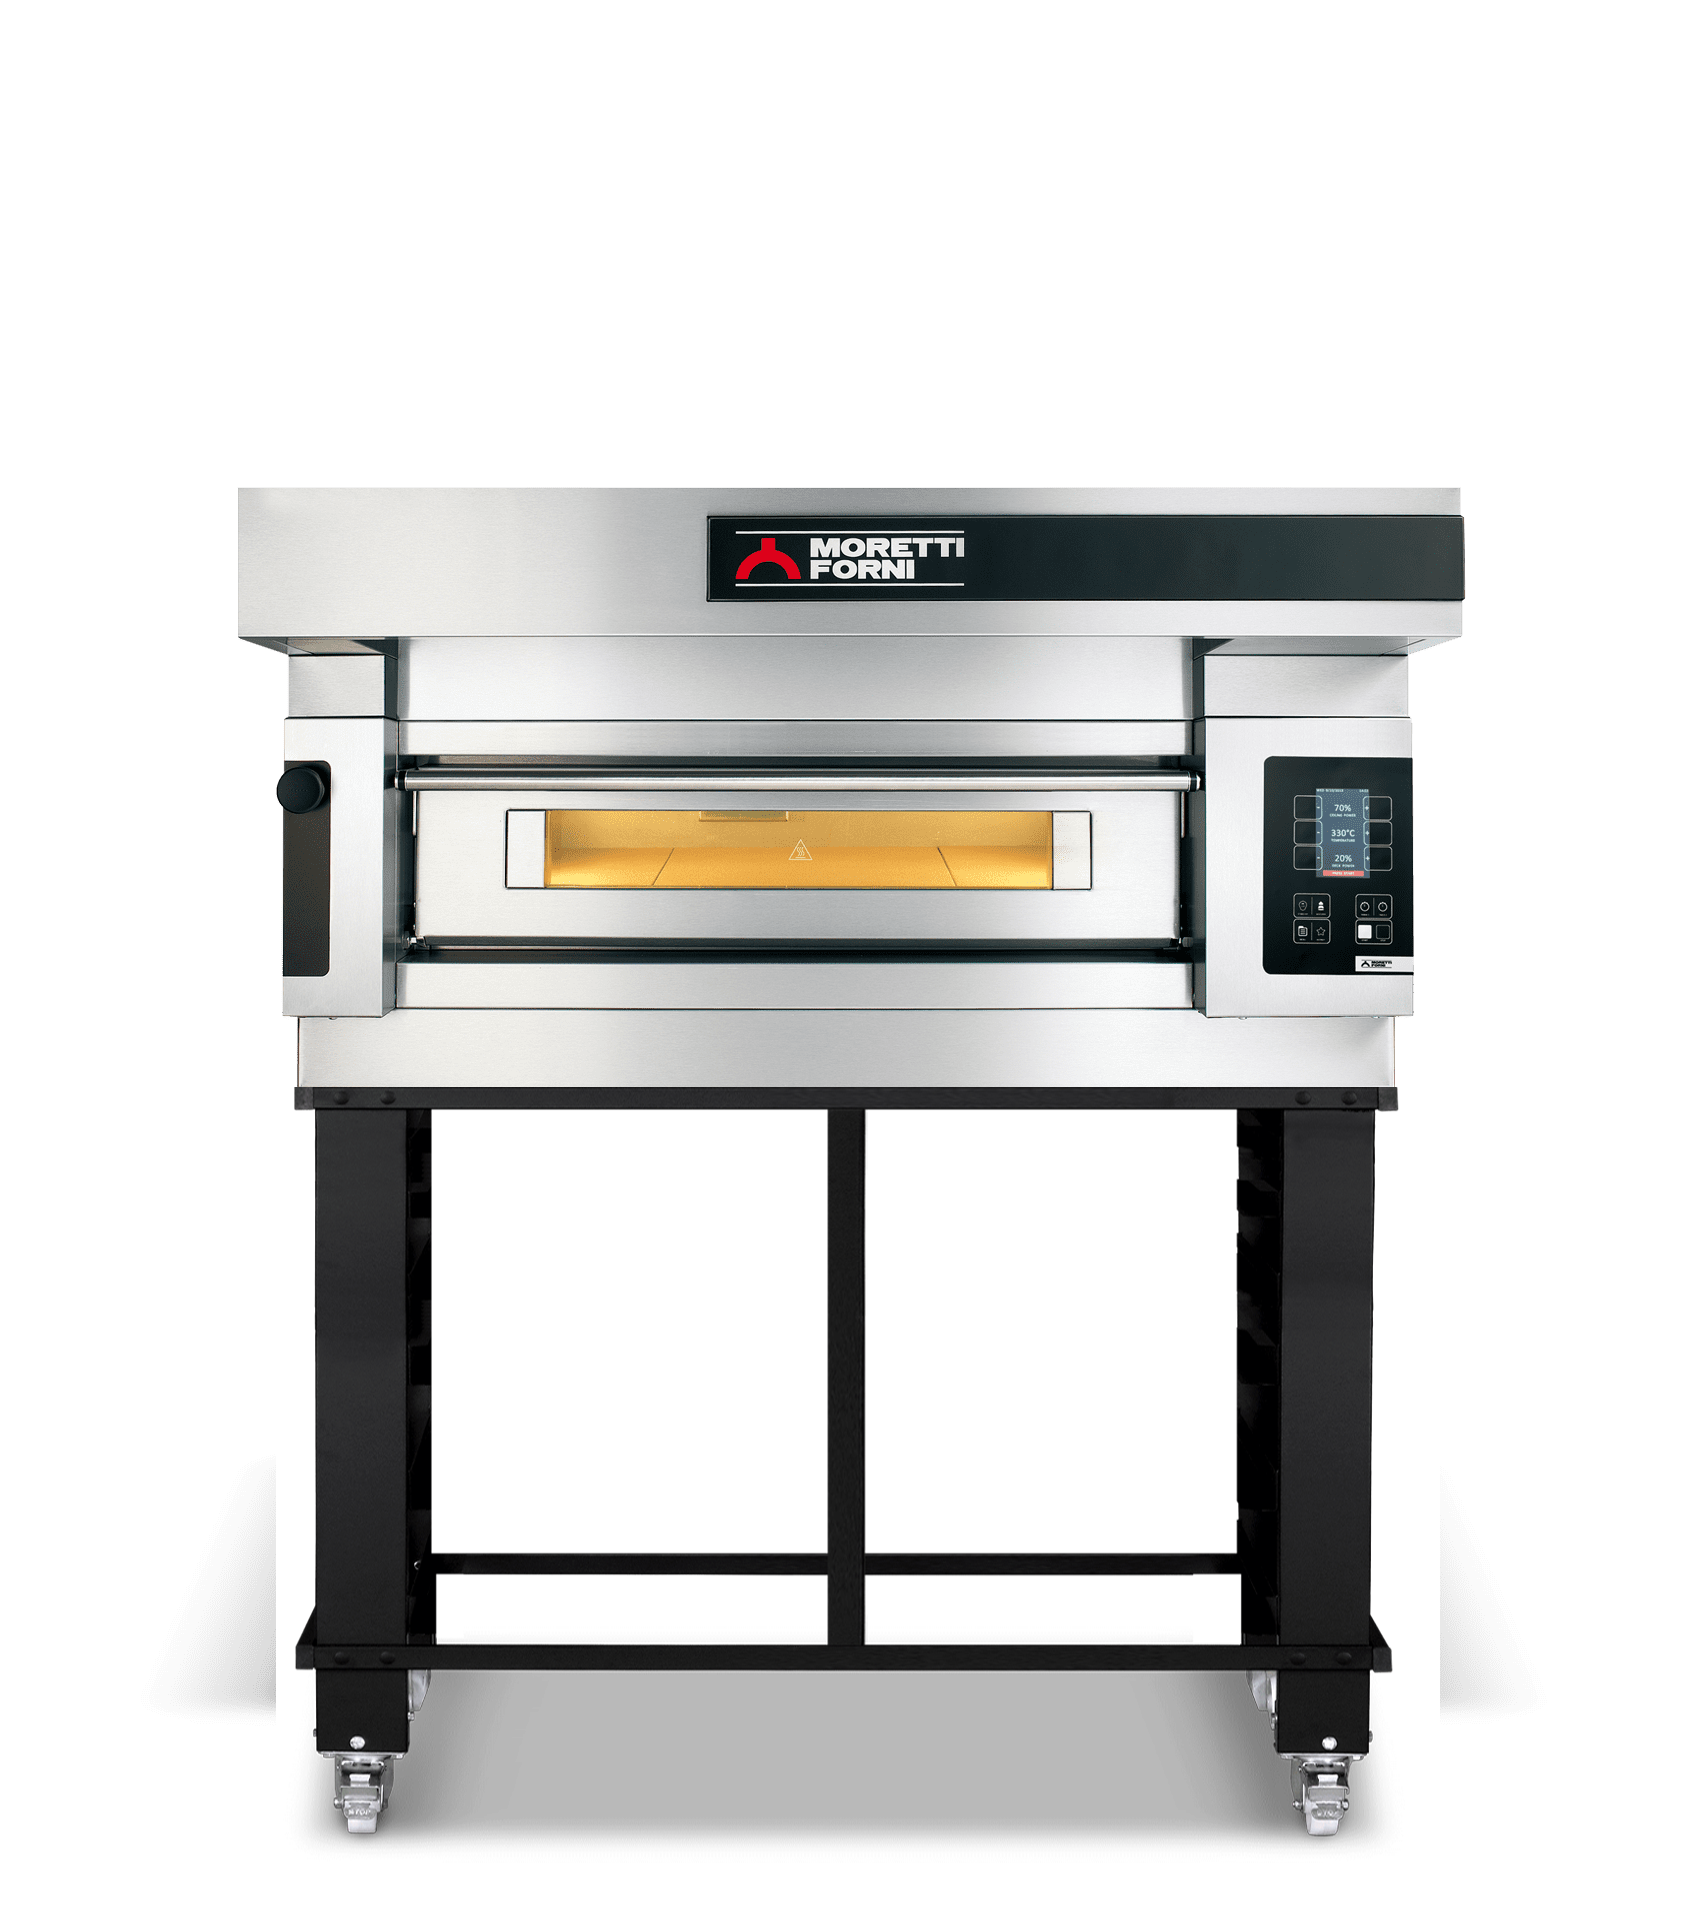 Serie S – Single Deck Oven on Stand